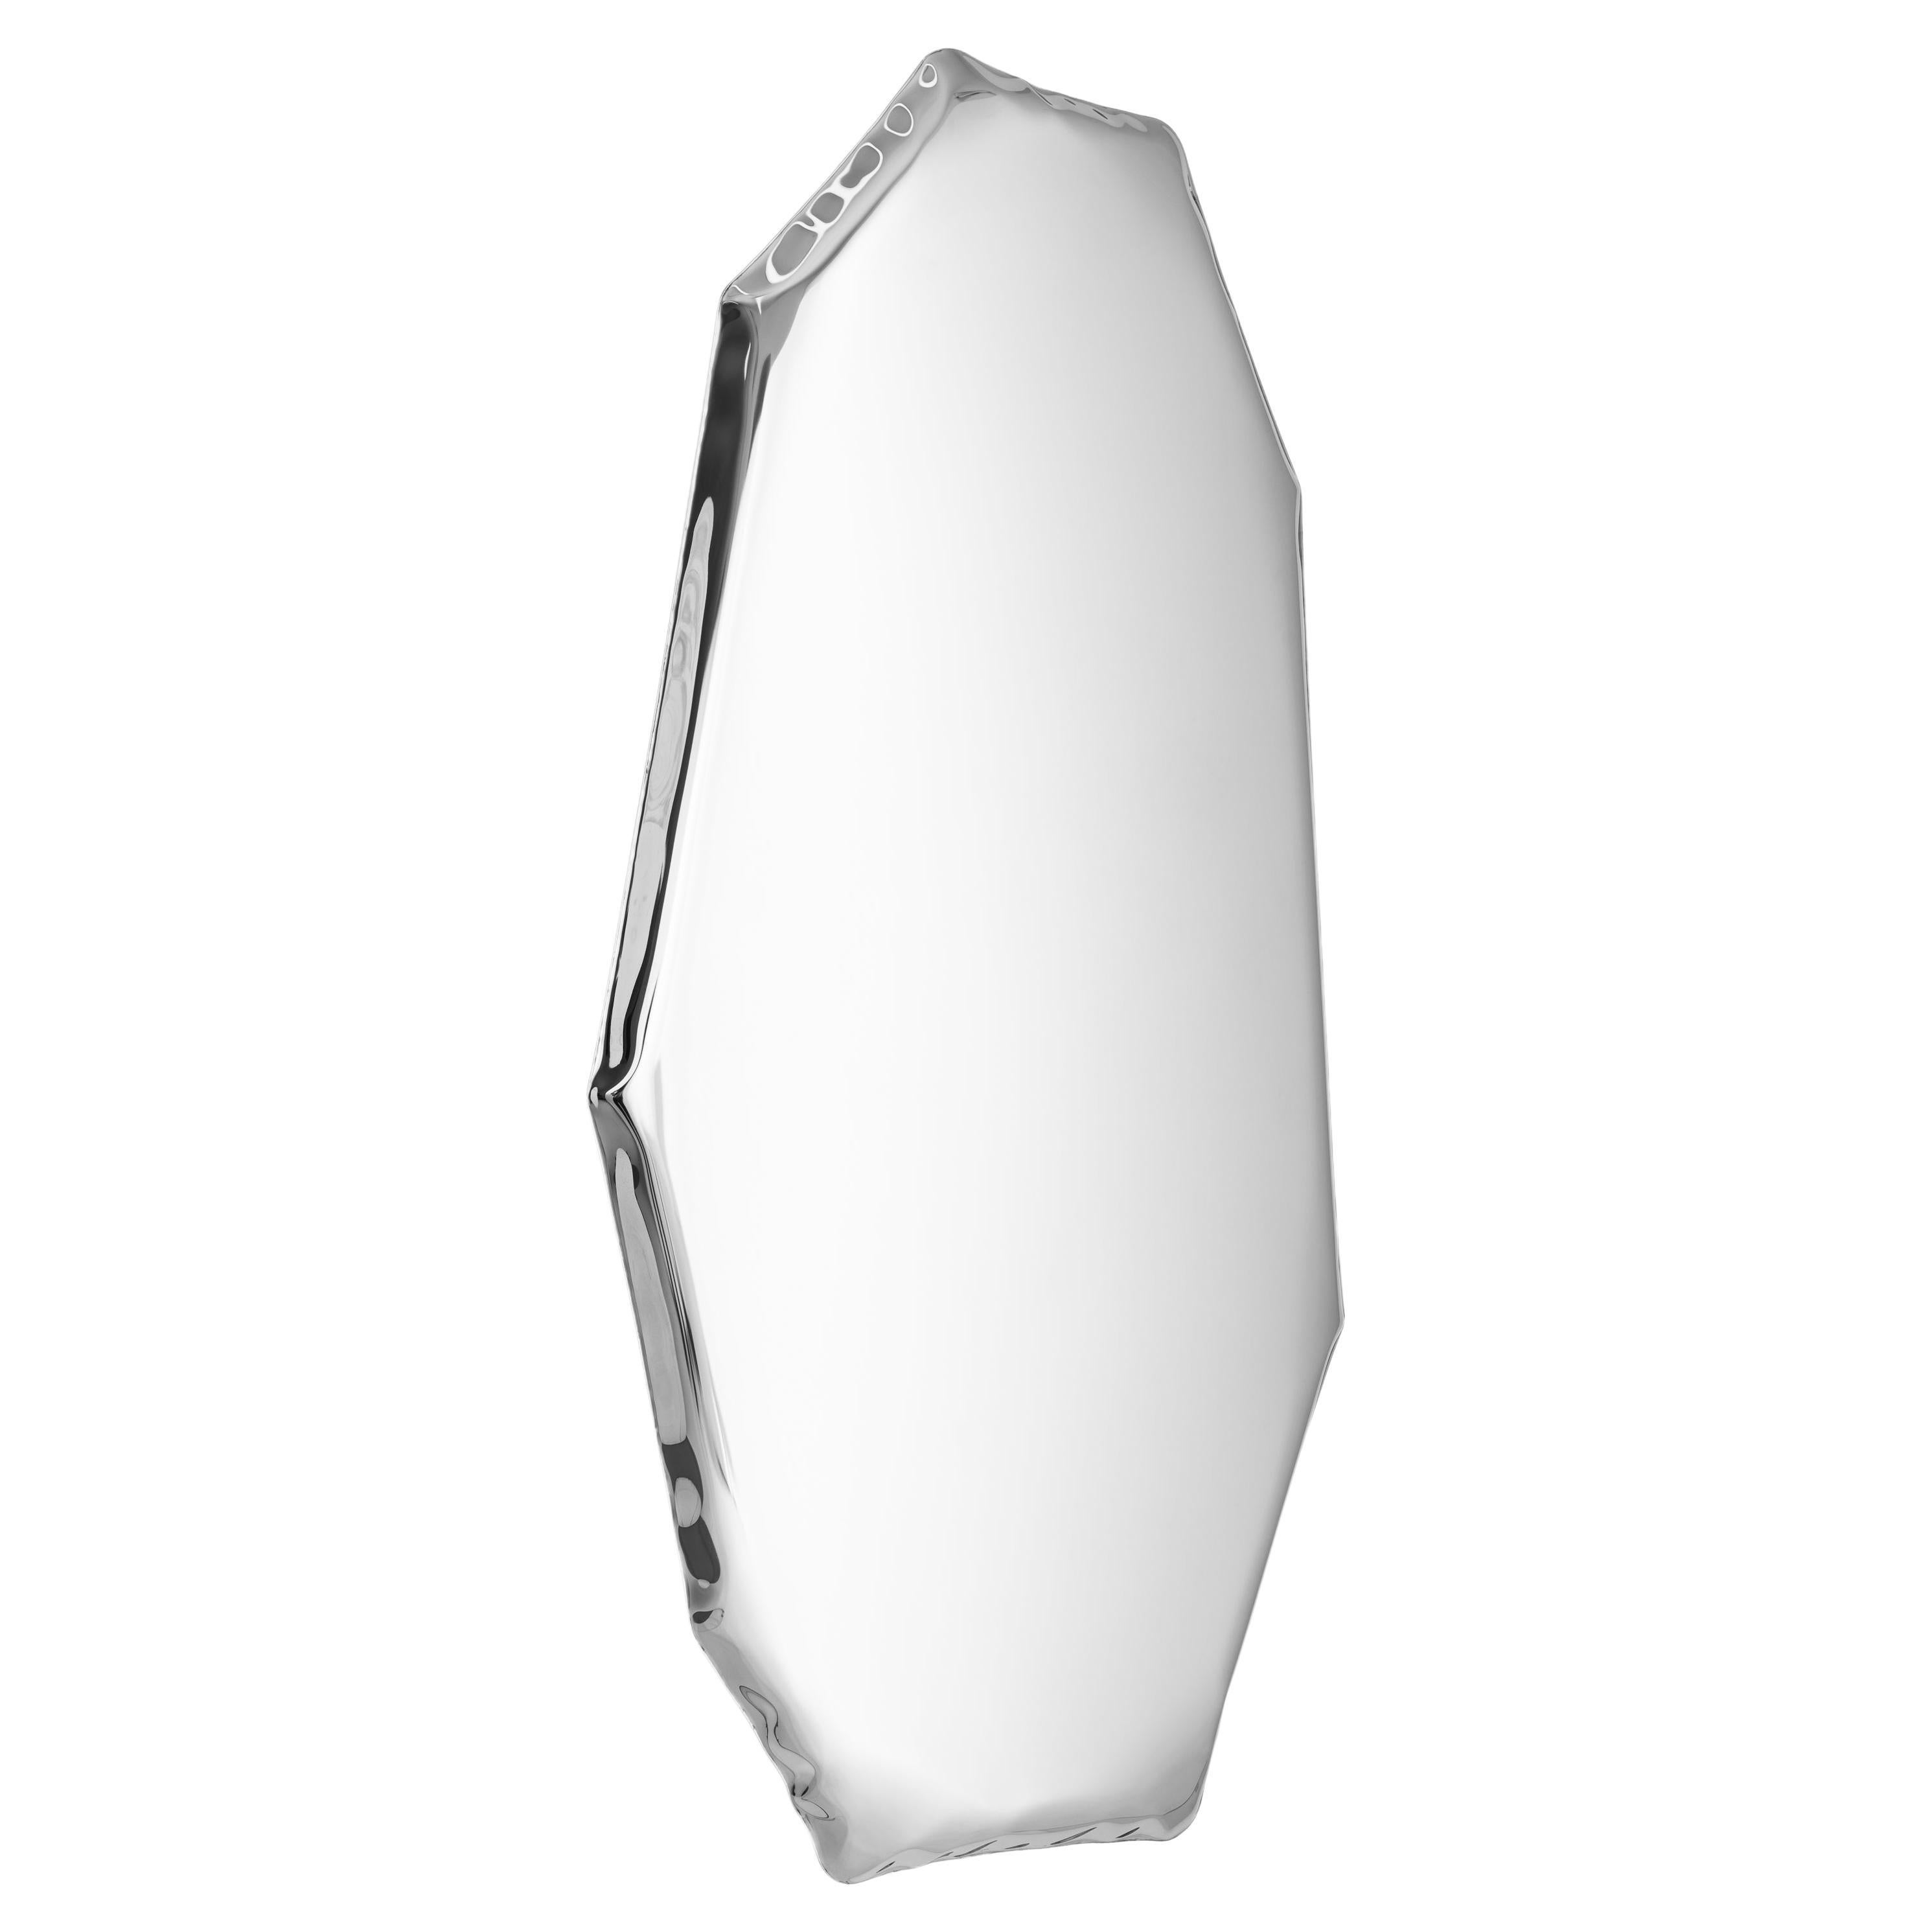 Tafla Mirror C3 in Polished Stainless Steel by Zieta For Sale